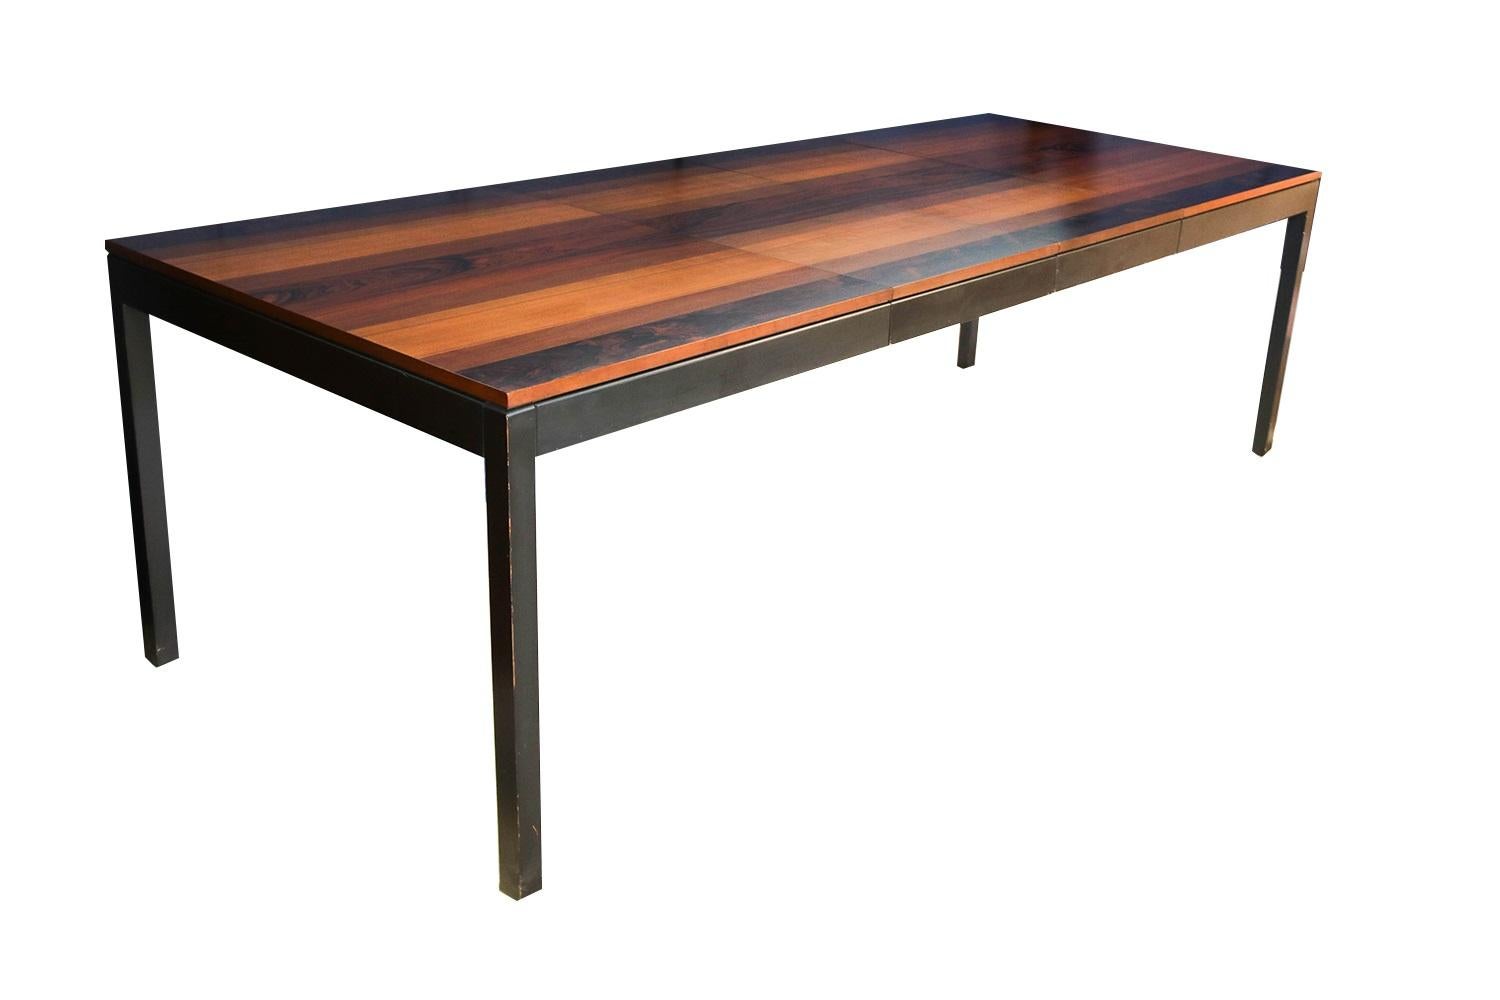 An exceptional Milo Baughman Parsons dining table circa 1960s, by Directional Furniture. This extraordinary table features a striped veneer top of gleaming rosewood, teak and walnut with smooth clean lines characteristic of classic Danish design.